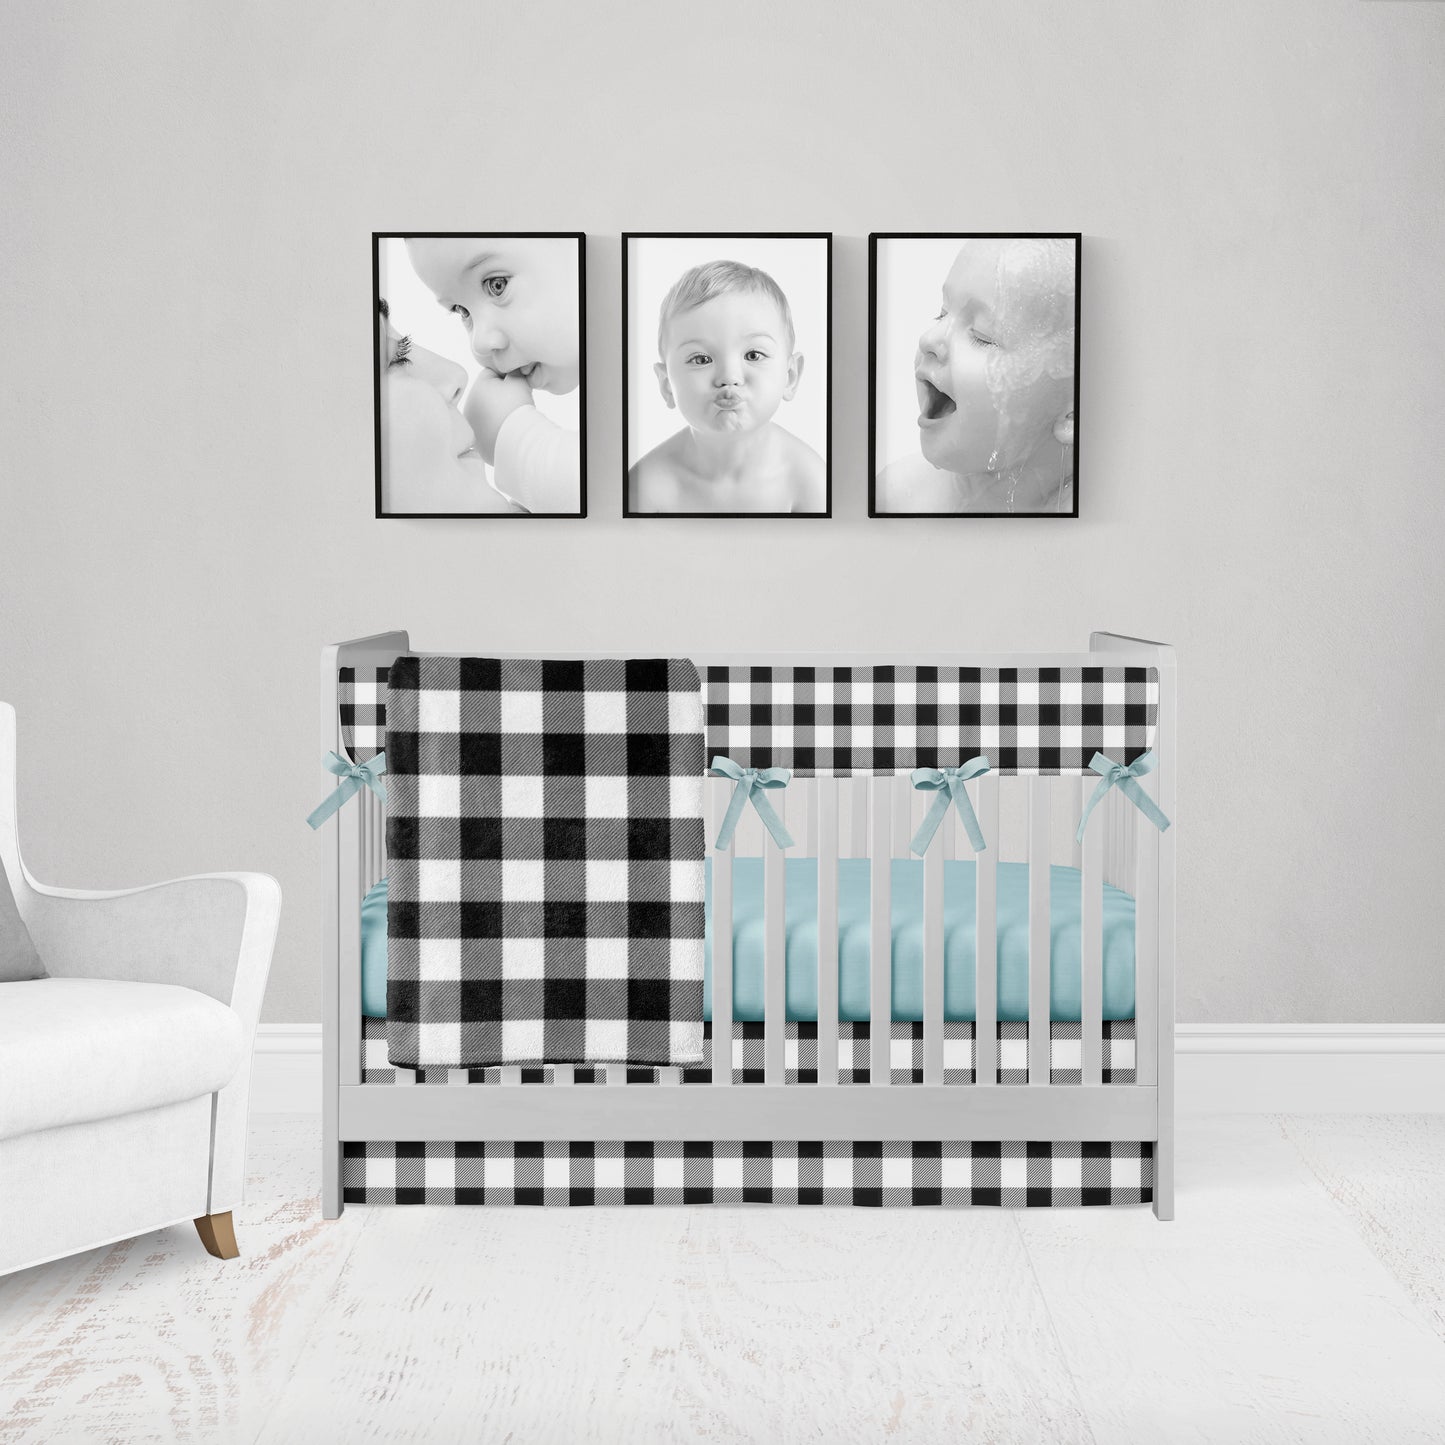 black gingham blanket, rail cover & crib skirt with aqua sheet and aqua ties on the rail cover. all the gingham check will be the same size squares.